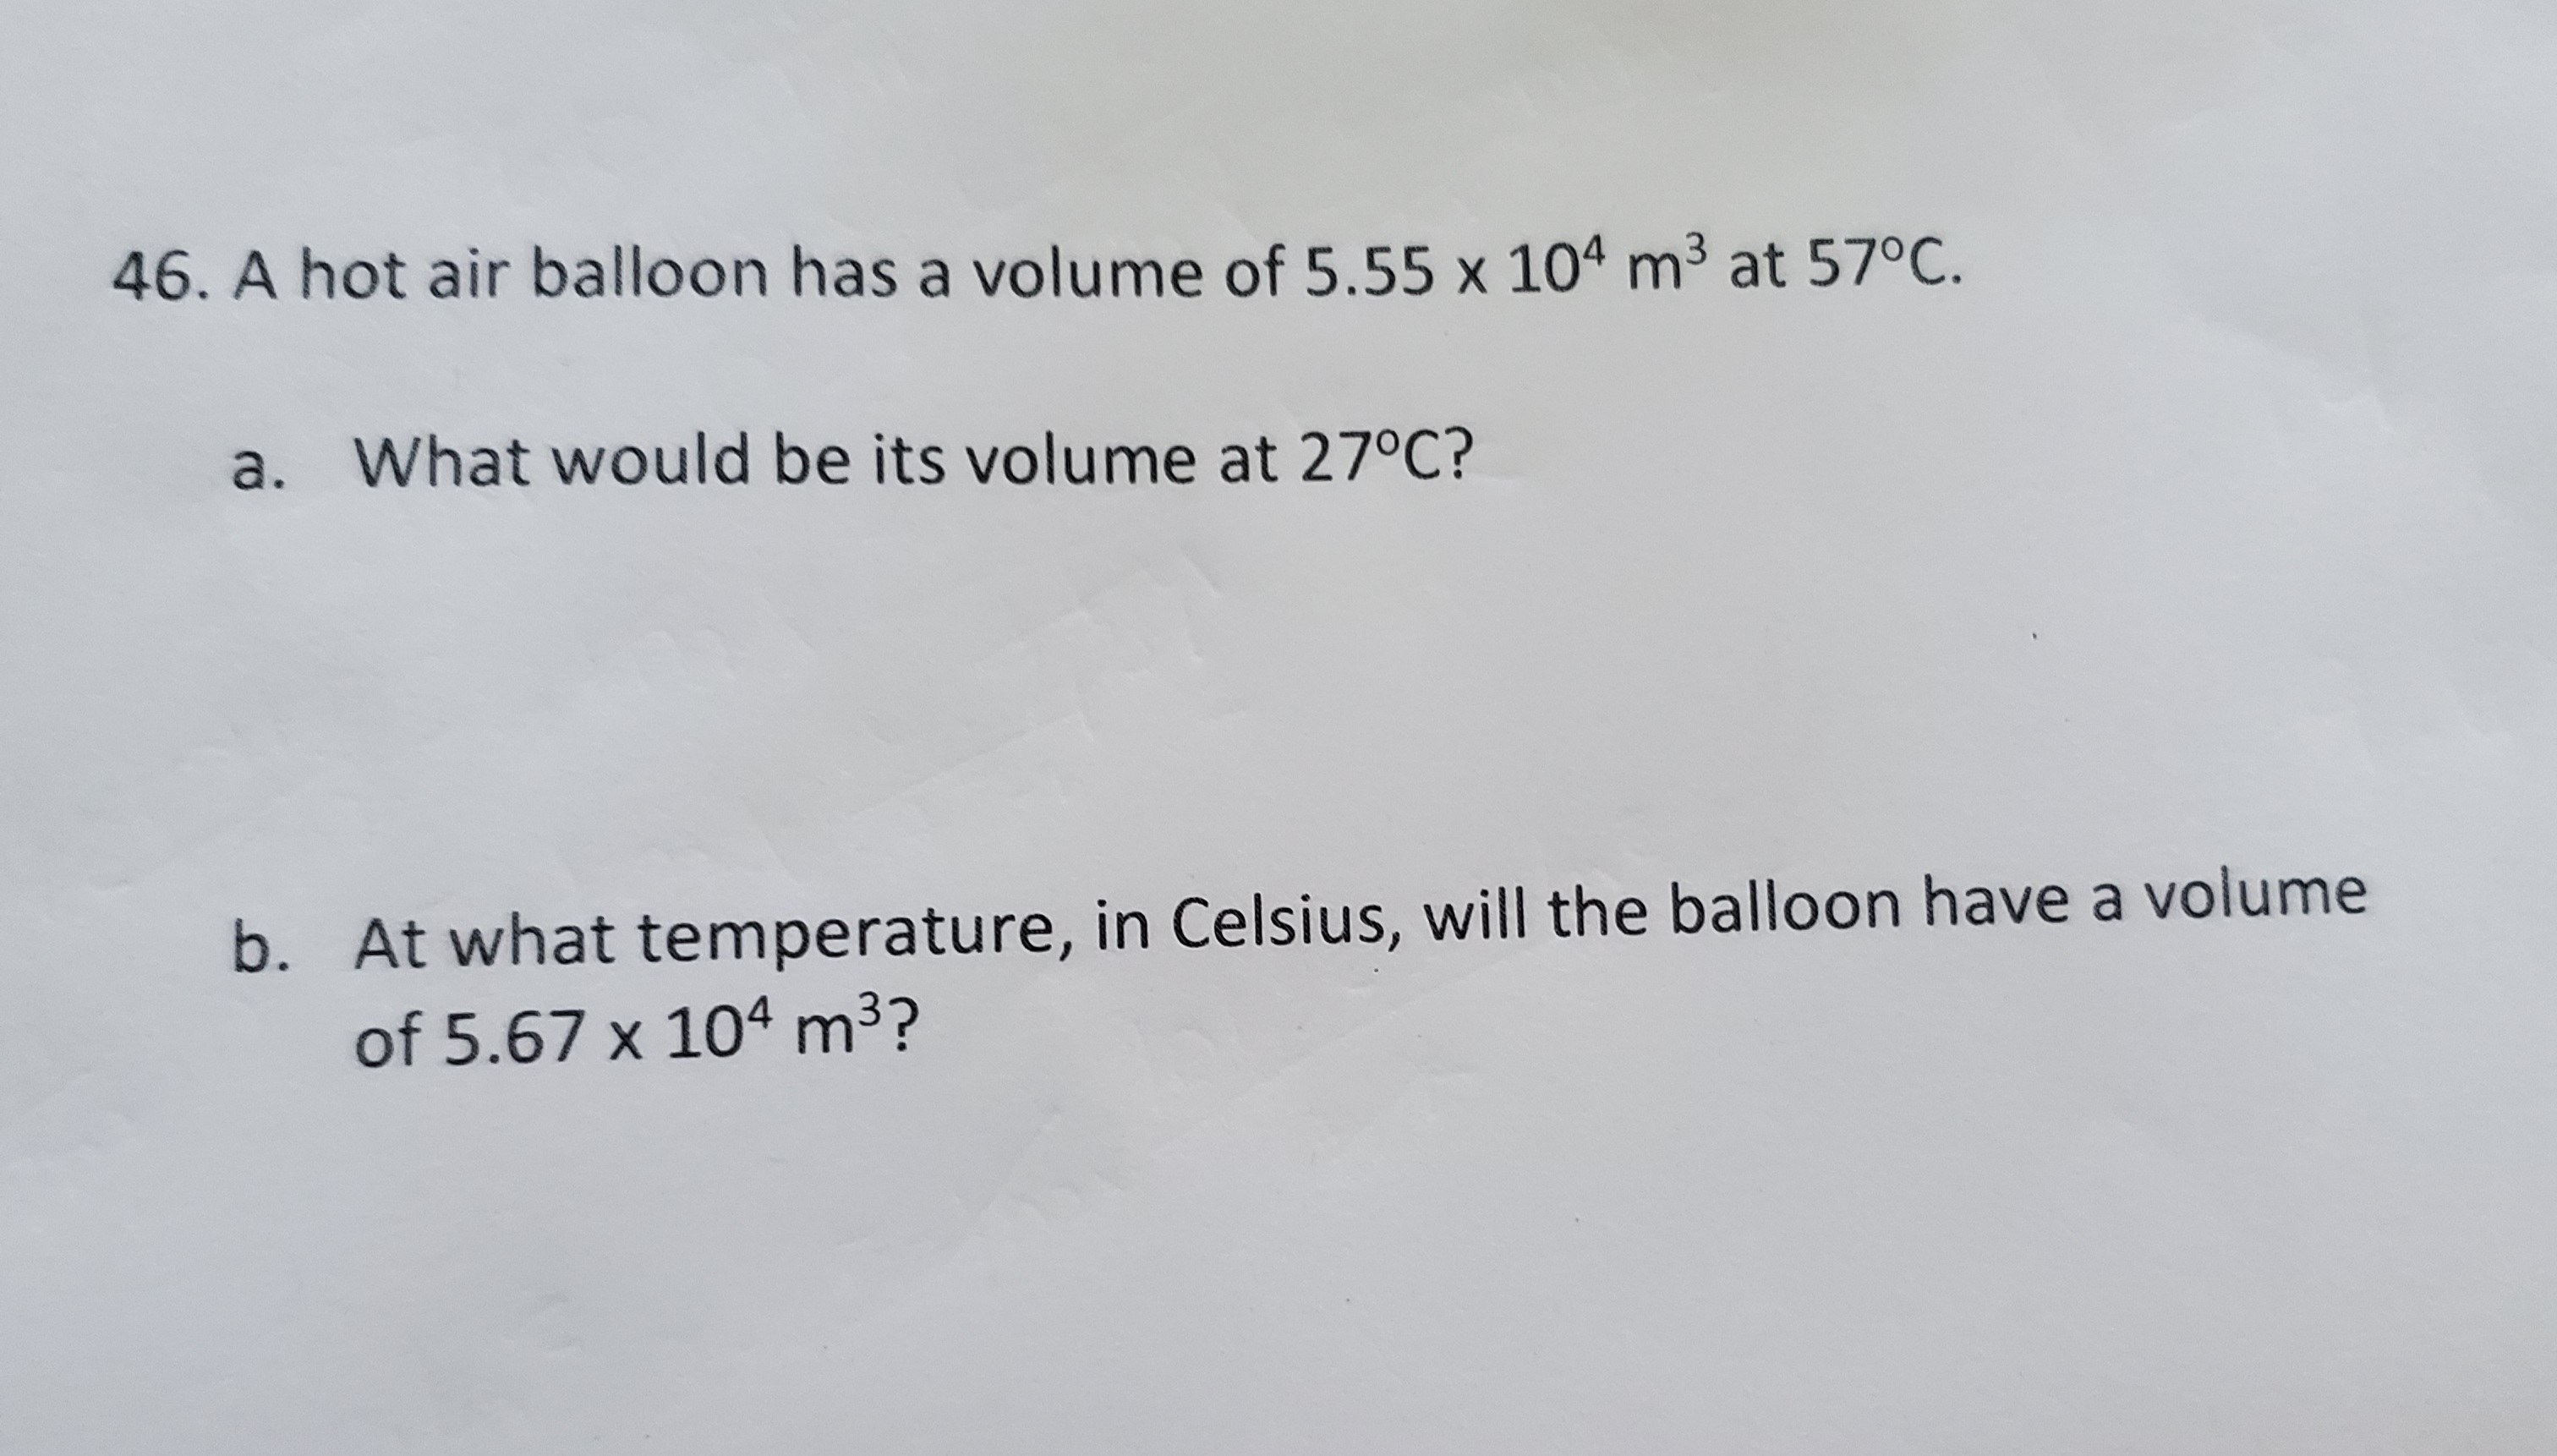 A hot air balloon has a volume of 5.55 x 104 m3 at 57°C.
a. What would be its volume at 27°C?
b. At what temperature, in Celsius, will the balloon have a volume
of 5.67 x 104 m3?
